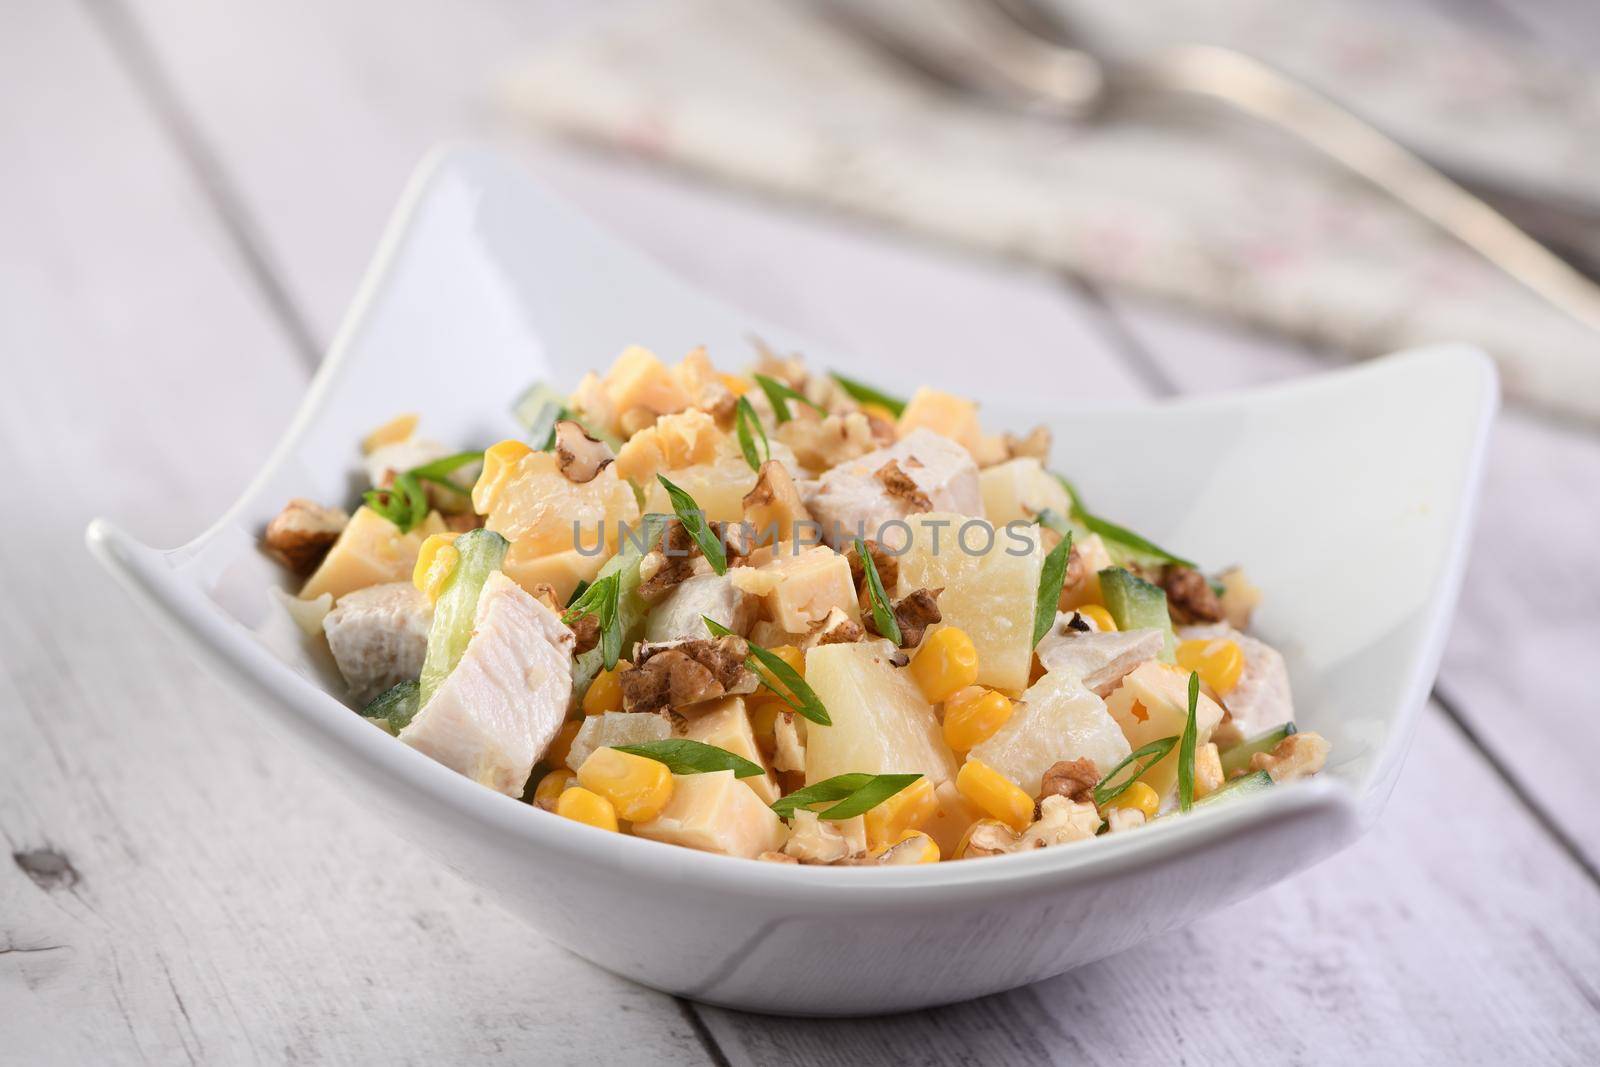 Chicken salad with pineapple by Apolonia